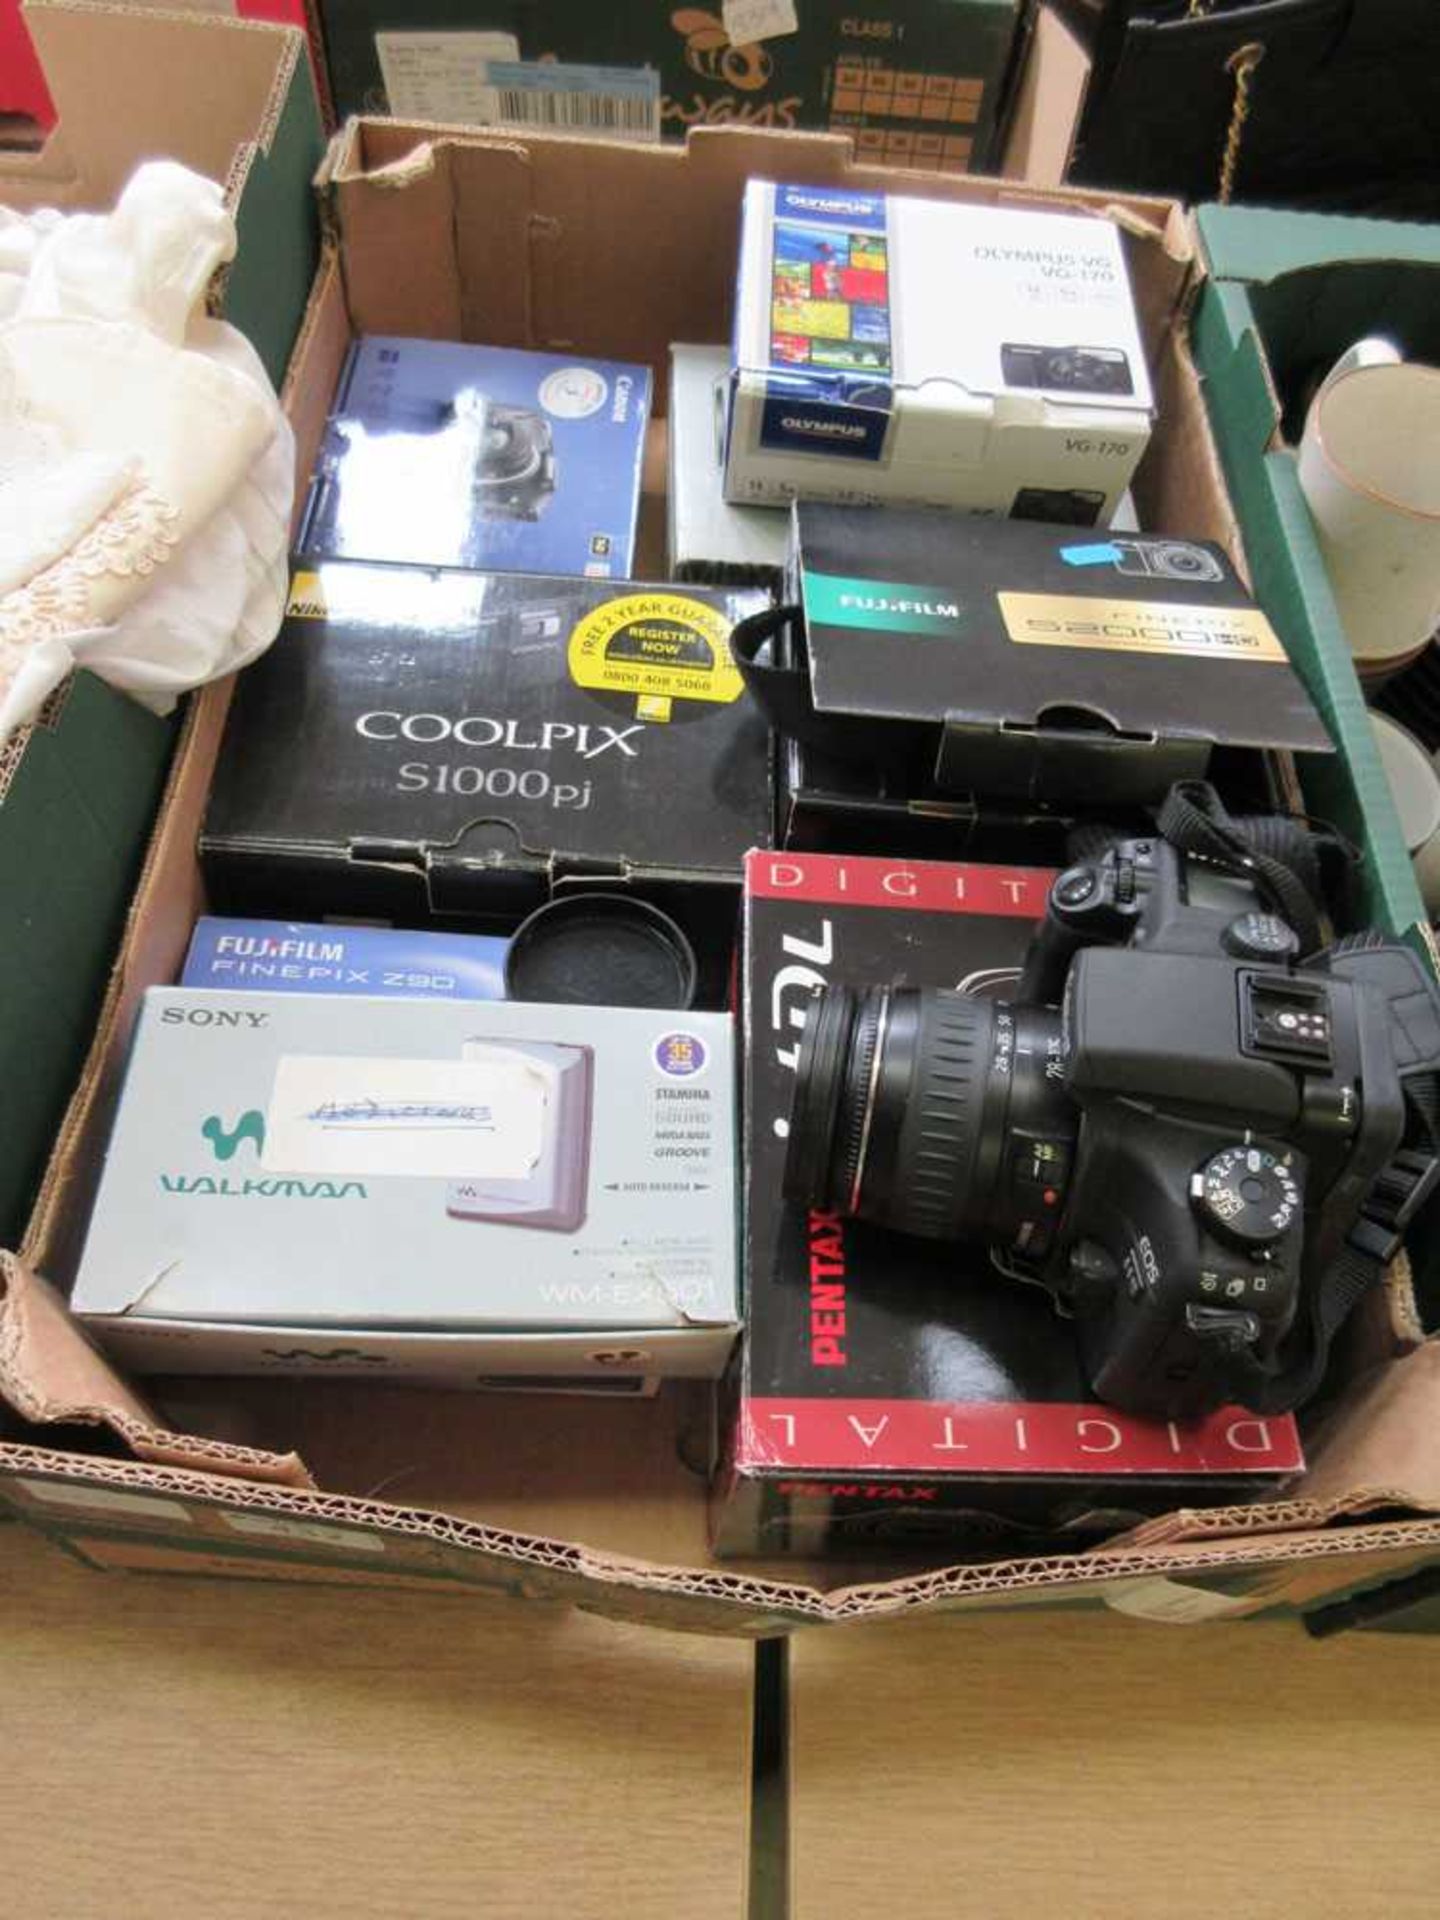 A tray containing a quantity of photographic equipment